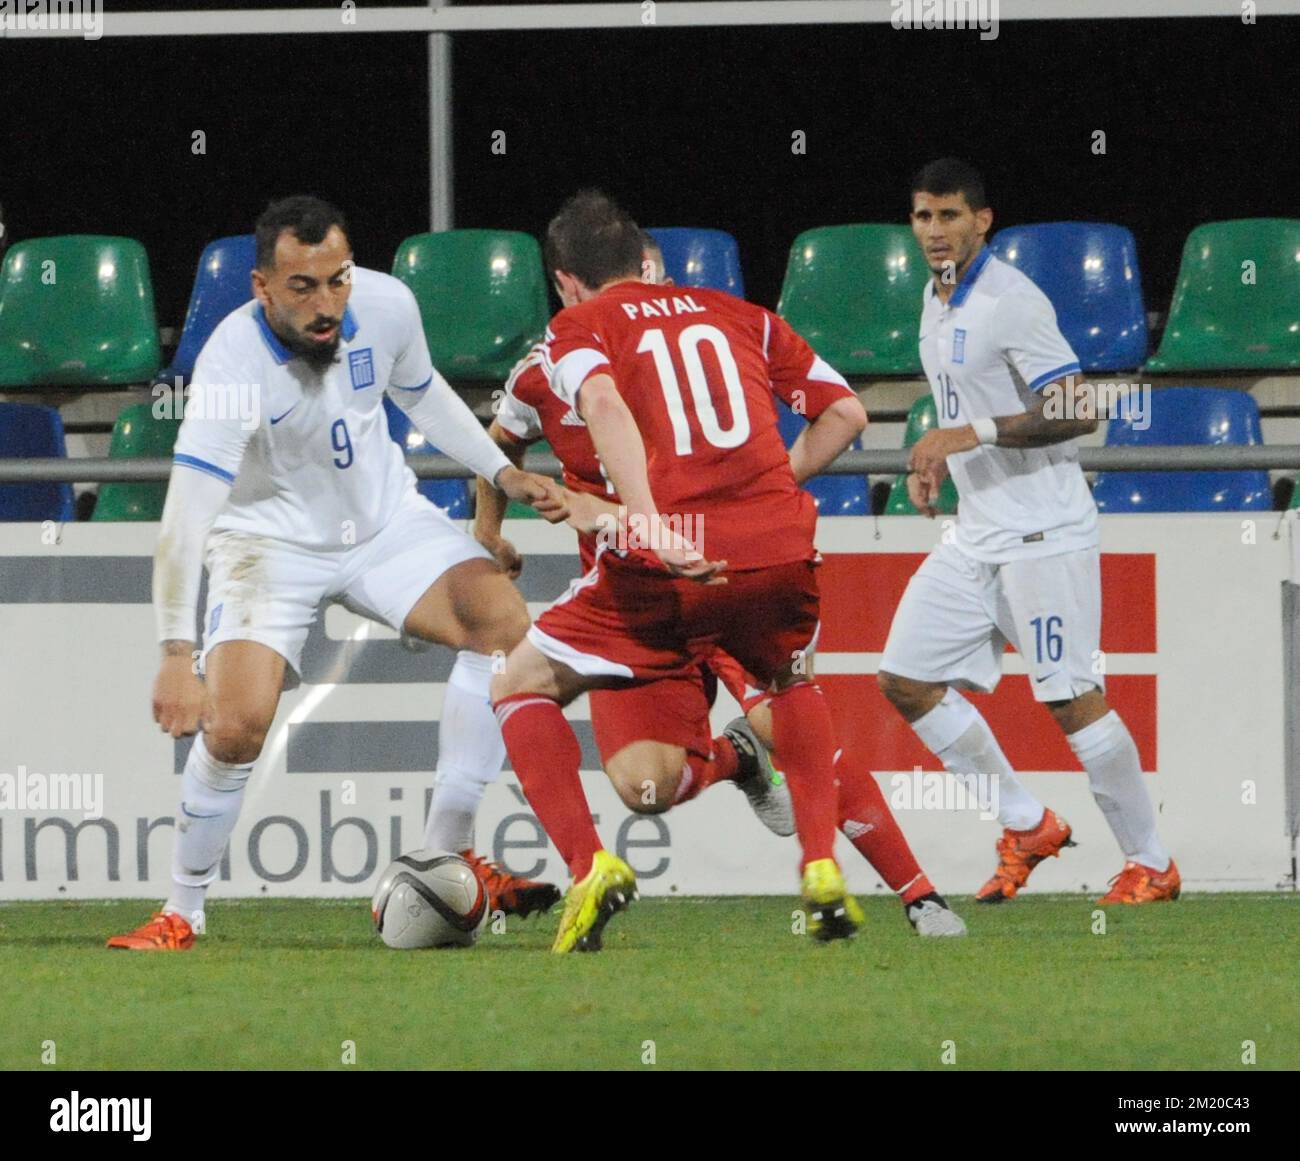 20151113 - DIFFERDANGE, LUXEMBOURG: Greece's Kostas Mitroglou and Luxembourg's Ben Payal fight for the ball during a friendly soccer game between Luxembourg national team and Greece, in Differdange, Luxembourg, Friday 13 November 2015. BELGA PHOTO SOPHIE KIP Stock Photo